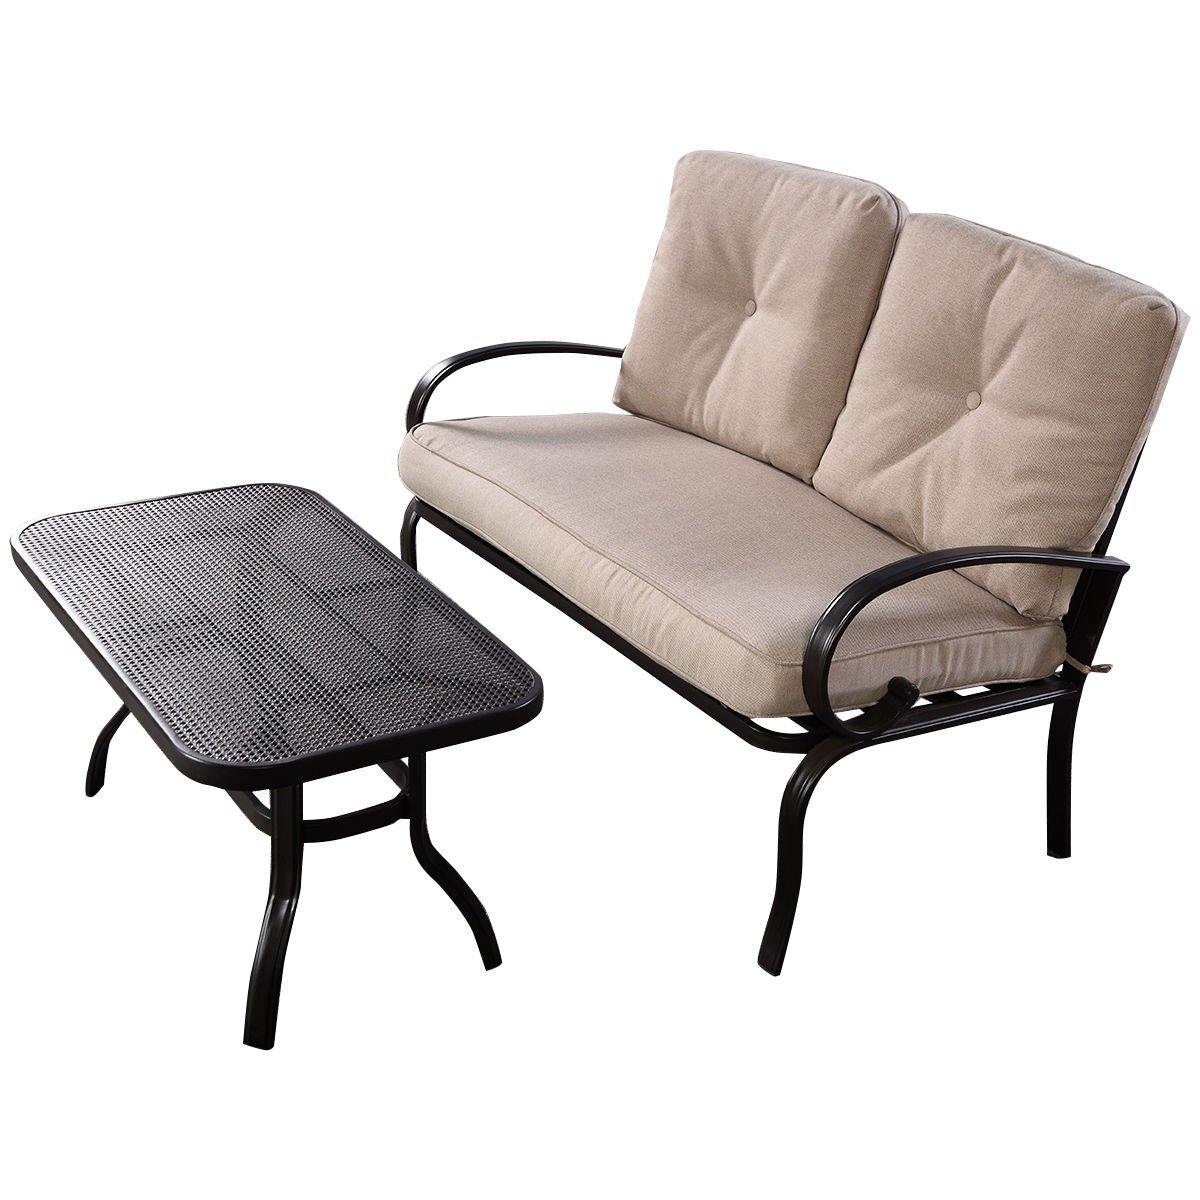 2 Pcs Patio Loveseat with Coffee Table Outdoor Bench with Cushion and Metal Frame(Beige & Black) - Giantexus